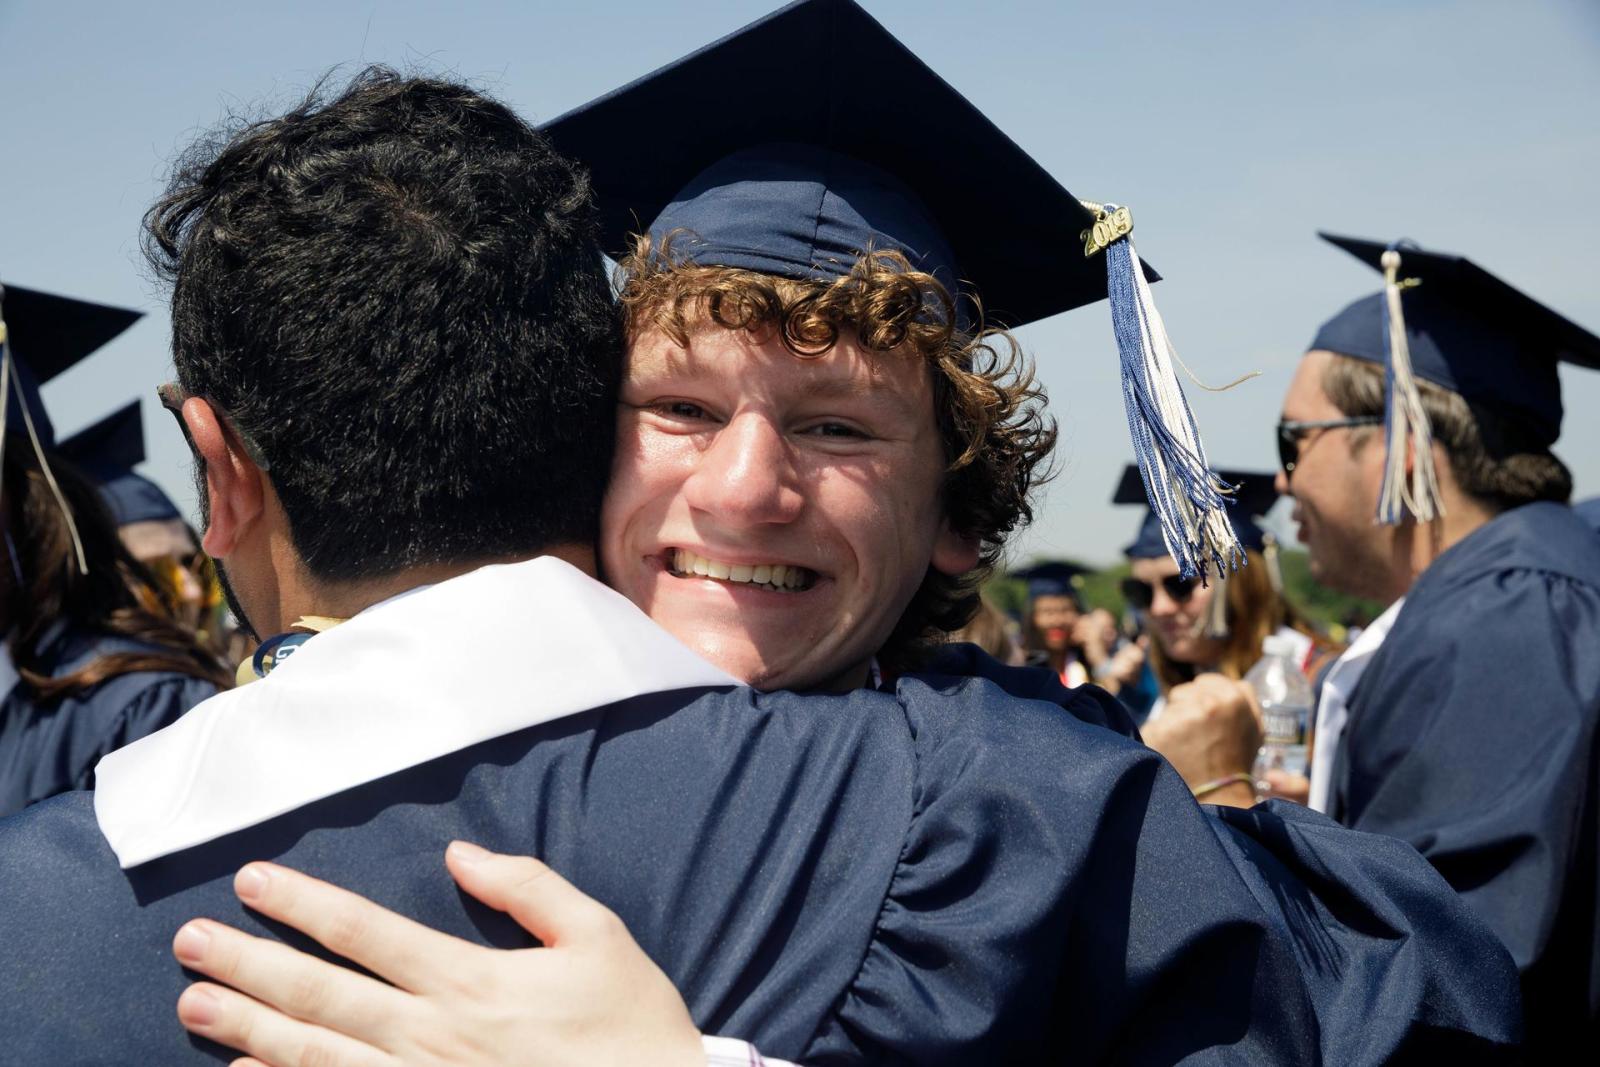 students embracing in commencement attire